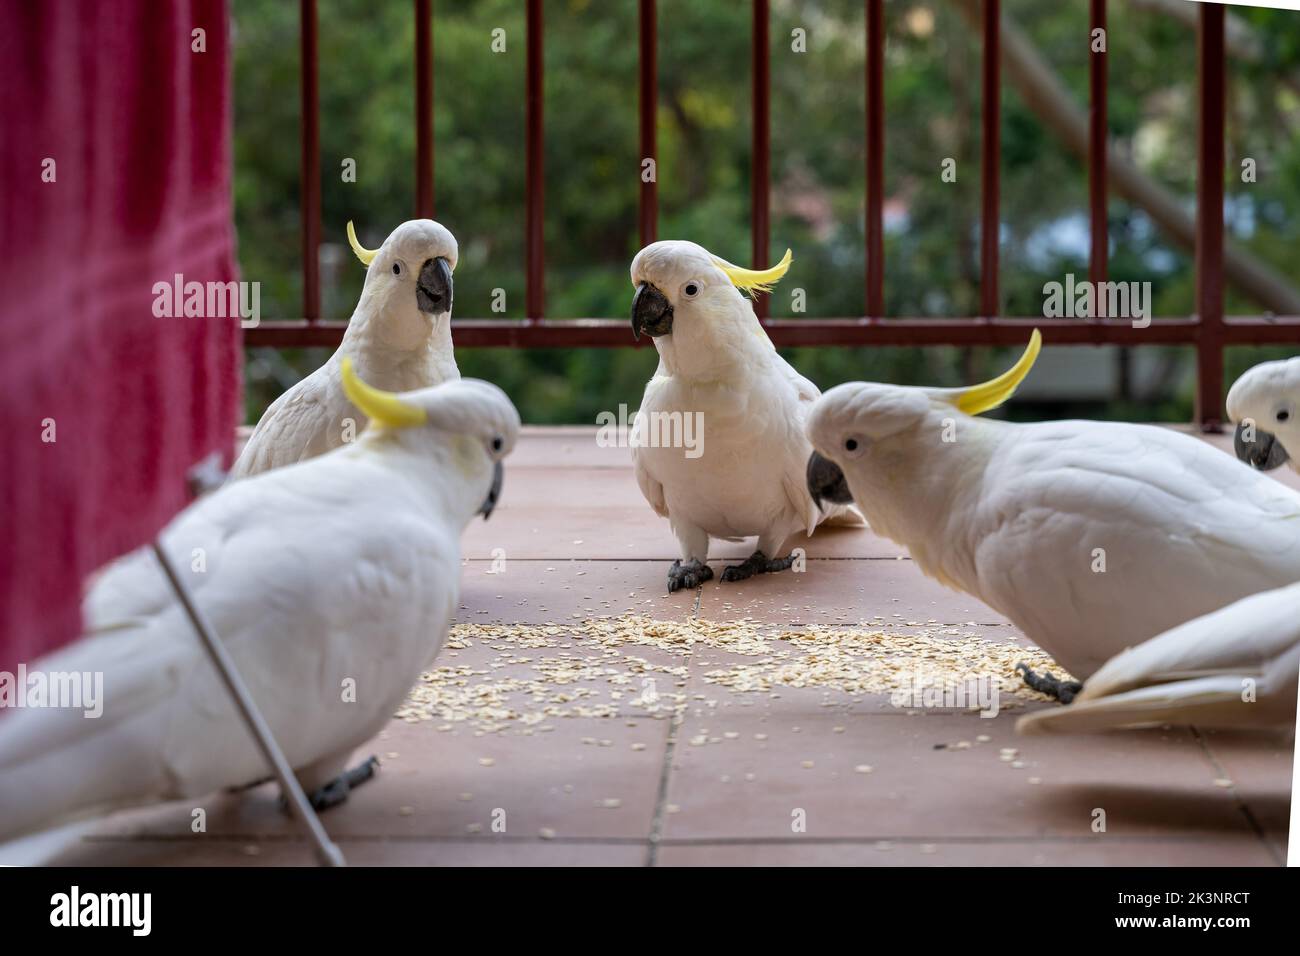 Australian native Cockatoo birds feeding on grains in balcony of apartment home in Australia. Concept of birds surviving in urban areas with humans. Stock Photo